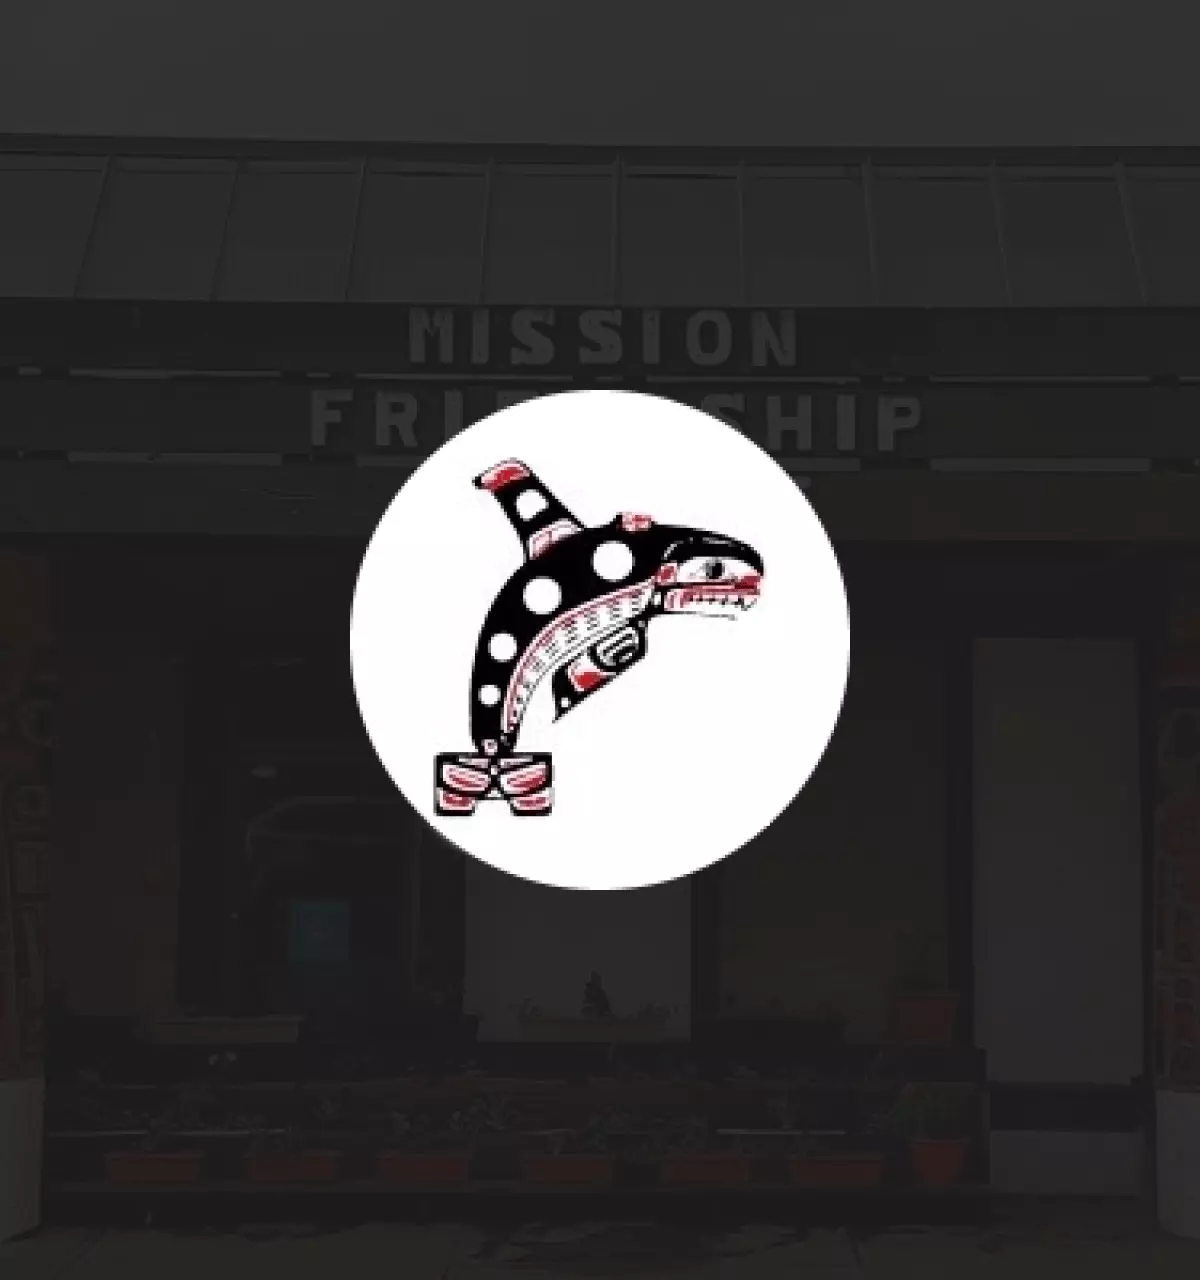 Mission Friendship Centre logo button over top of an image of the centre